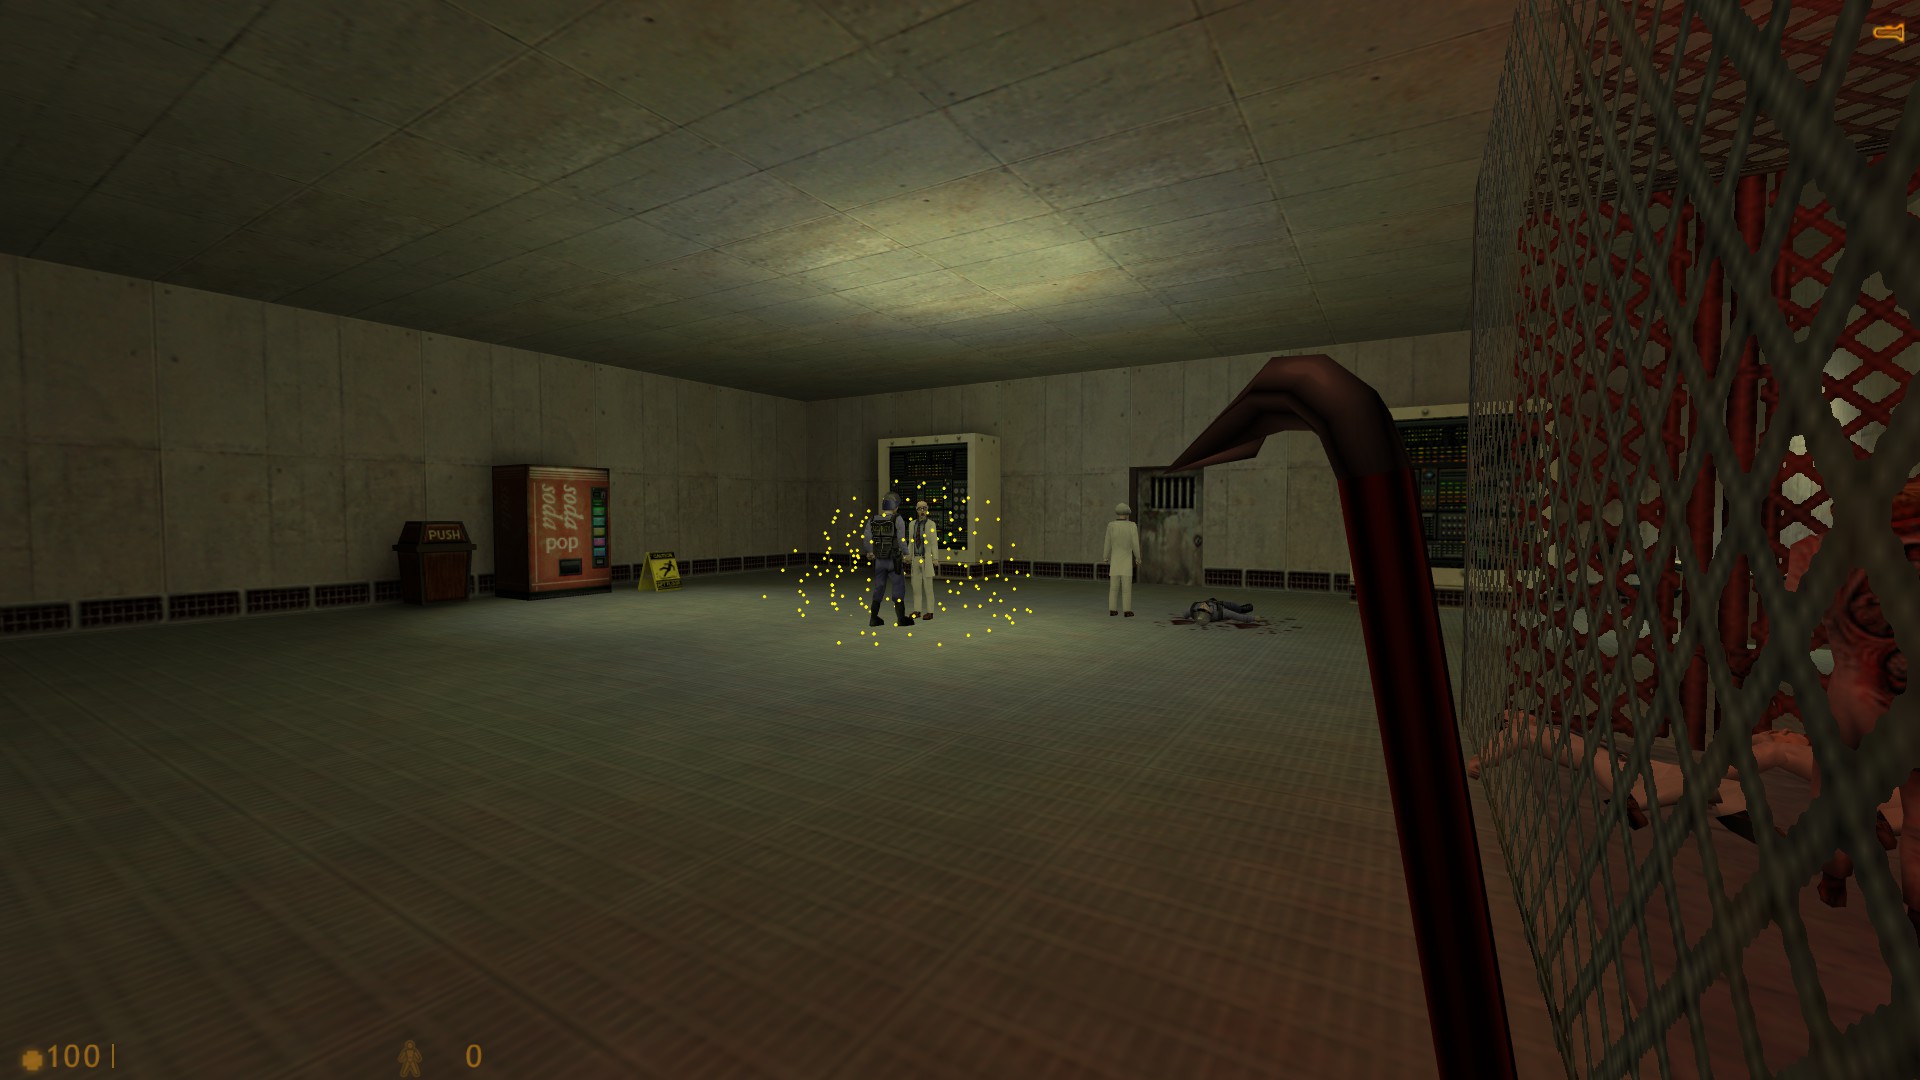 Five Nights at Freddy's Maps [Half-Life] [Mods]